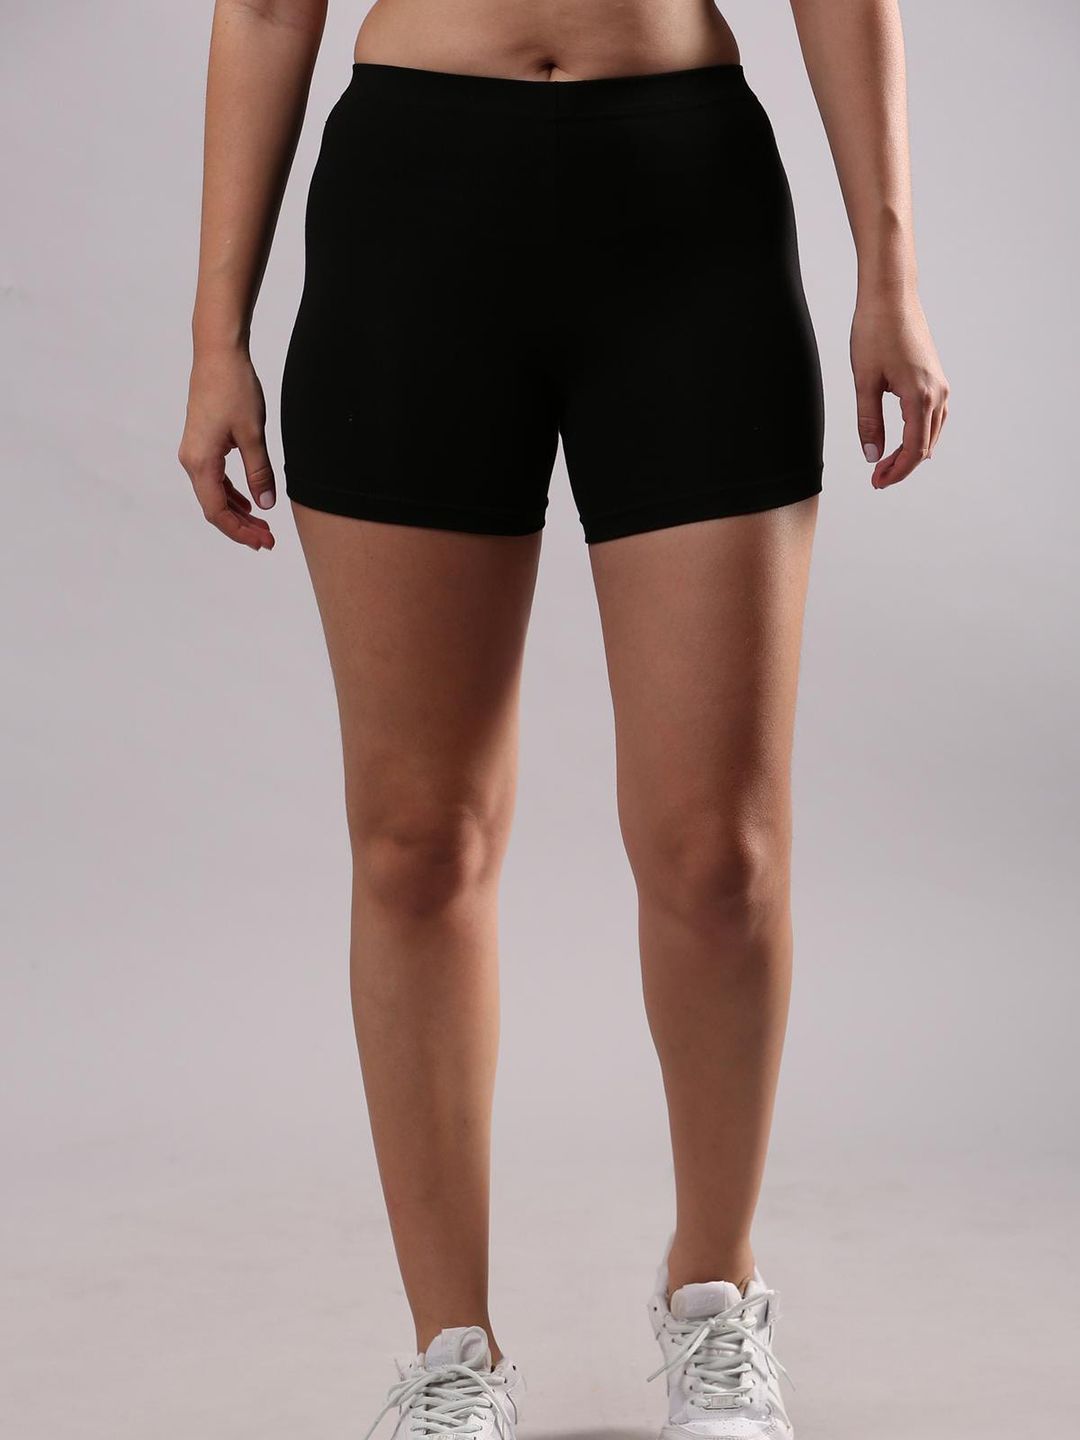 The Dance Bible Women Black Slim Fit Outdoor Sports Shorts with Antimicrobial Technology Price in India